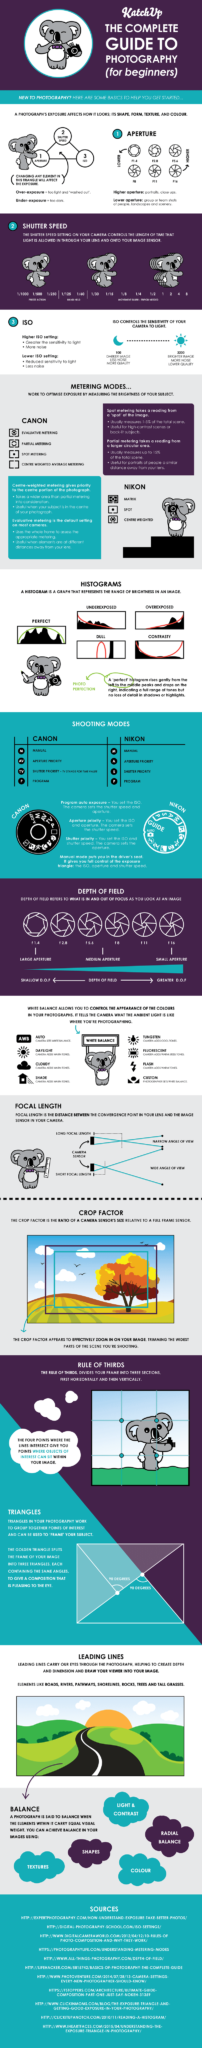 Photography-guide-infographic-compressed